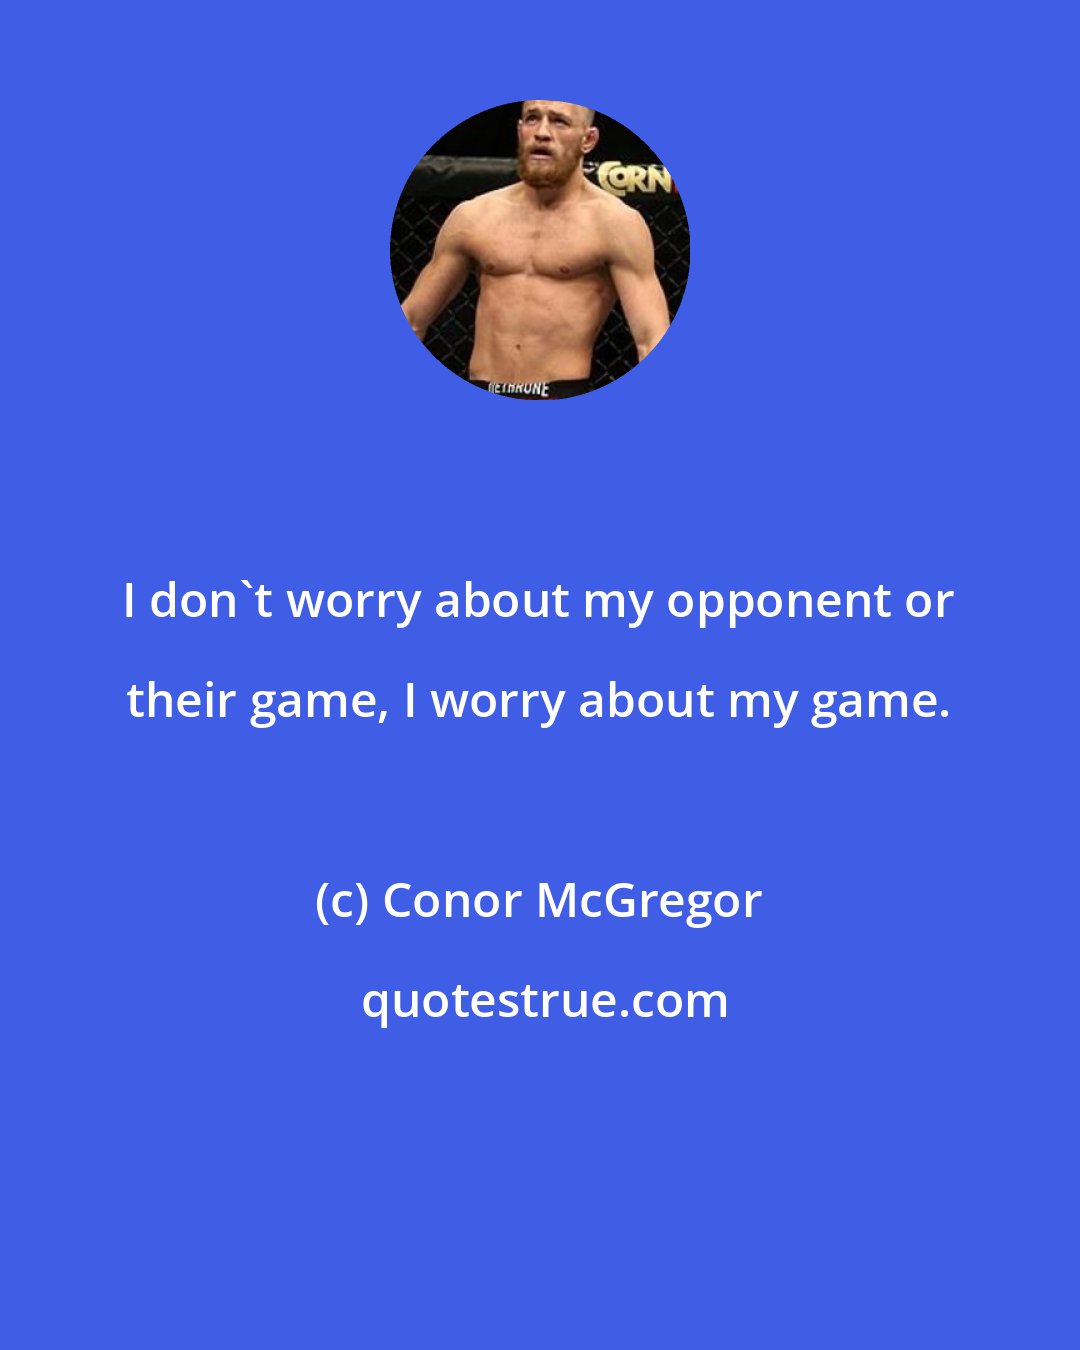 Conor McGregor: I don't worry about my opponent or their game, I worry about my game.